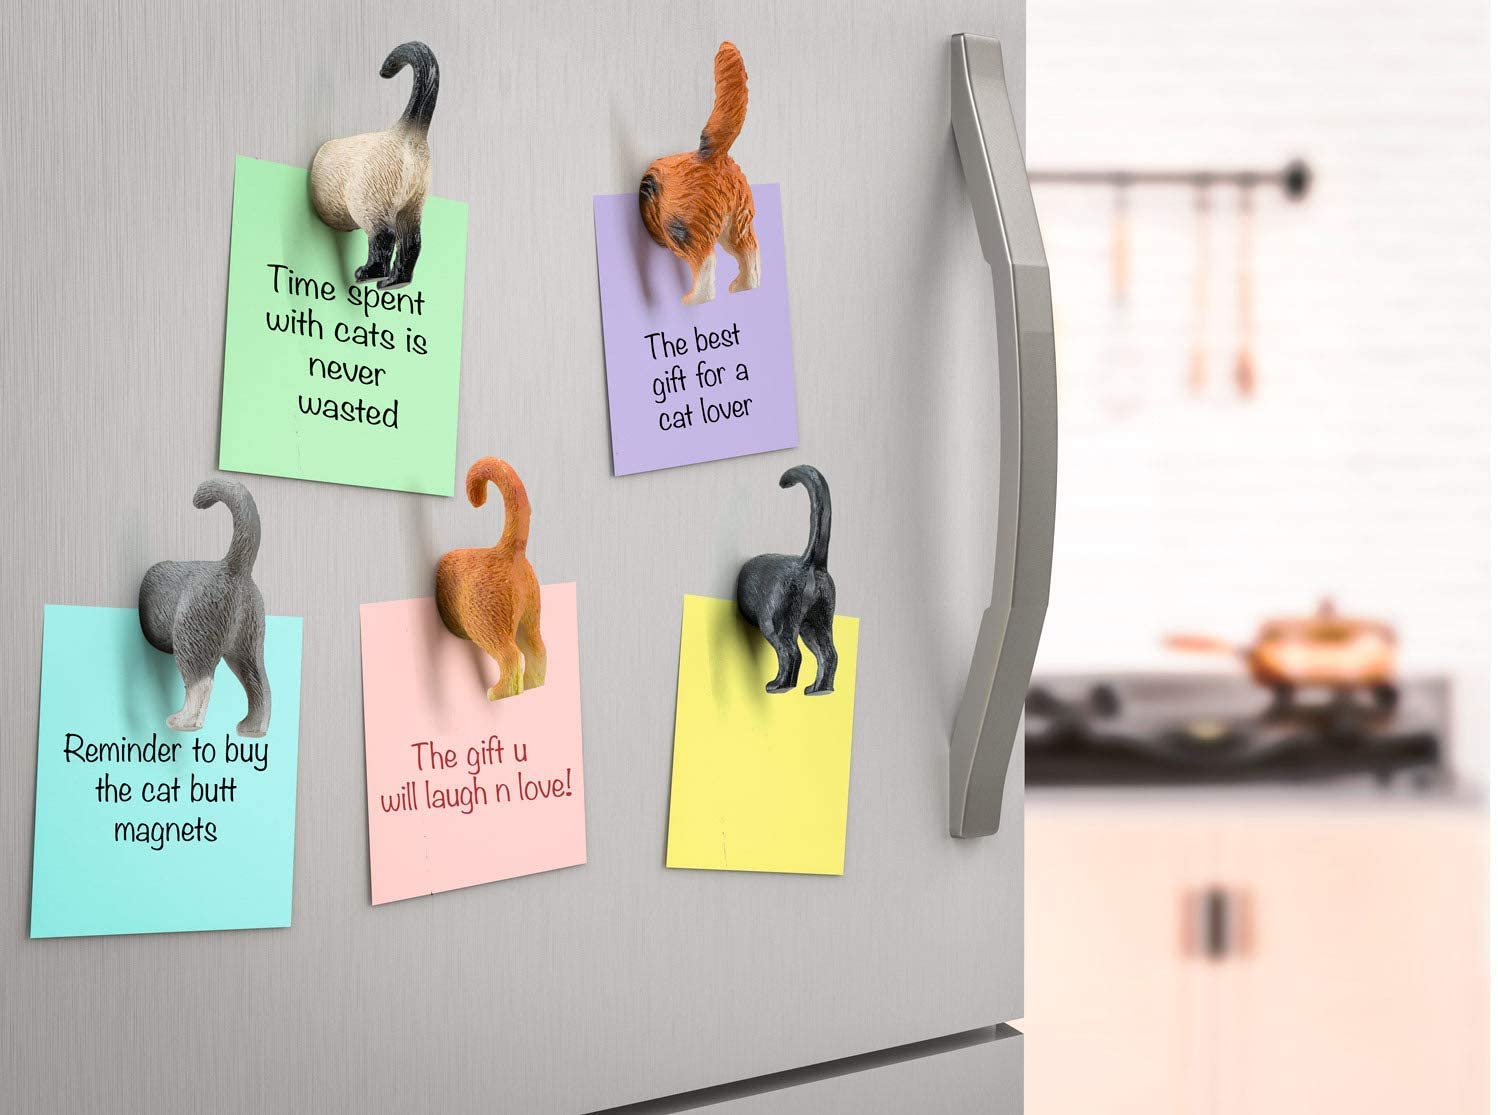 Cat Butt Magnets Toys Set for Refrigerator - Set of 10 for Cat & Pet Lovers Stuff - Cat Tails - Perfect for Fridge, Whiteboard, Calendar - Cat Gifts & Decor